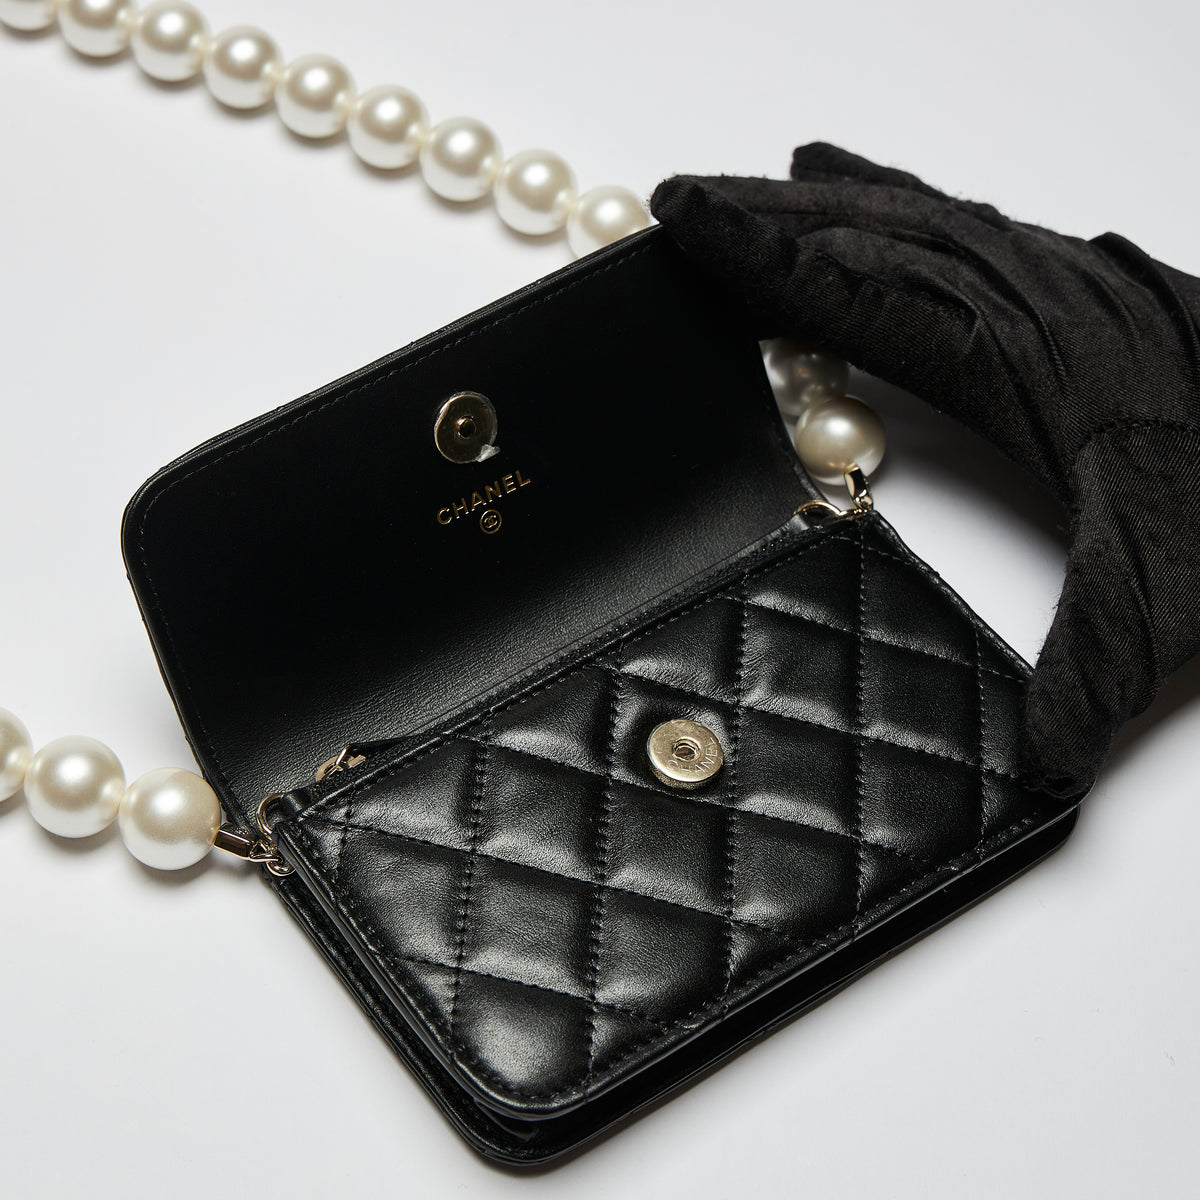 Excellent Pre-Loved Black Lambskin Quilted Leather Mini Bag with Oversized Faux Pearl Shoulder Strap.(flap)